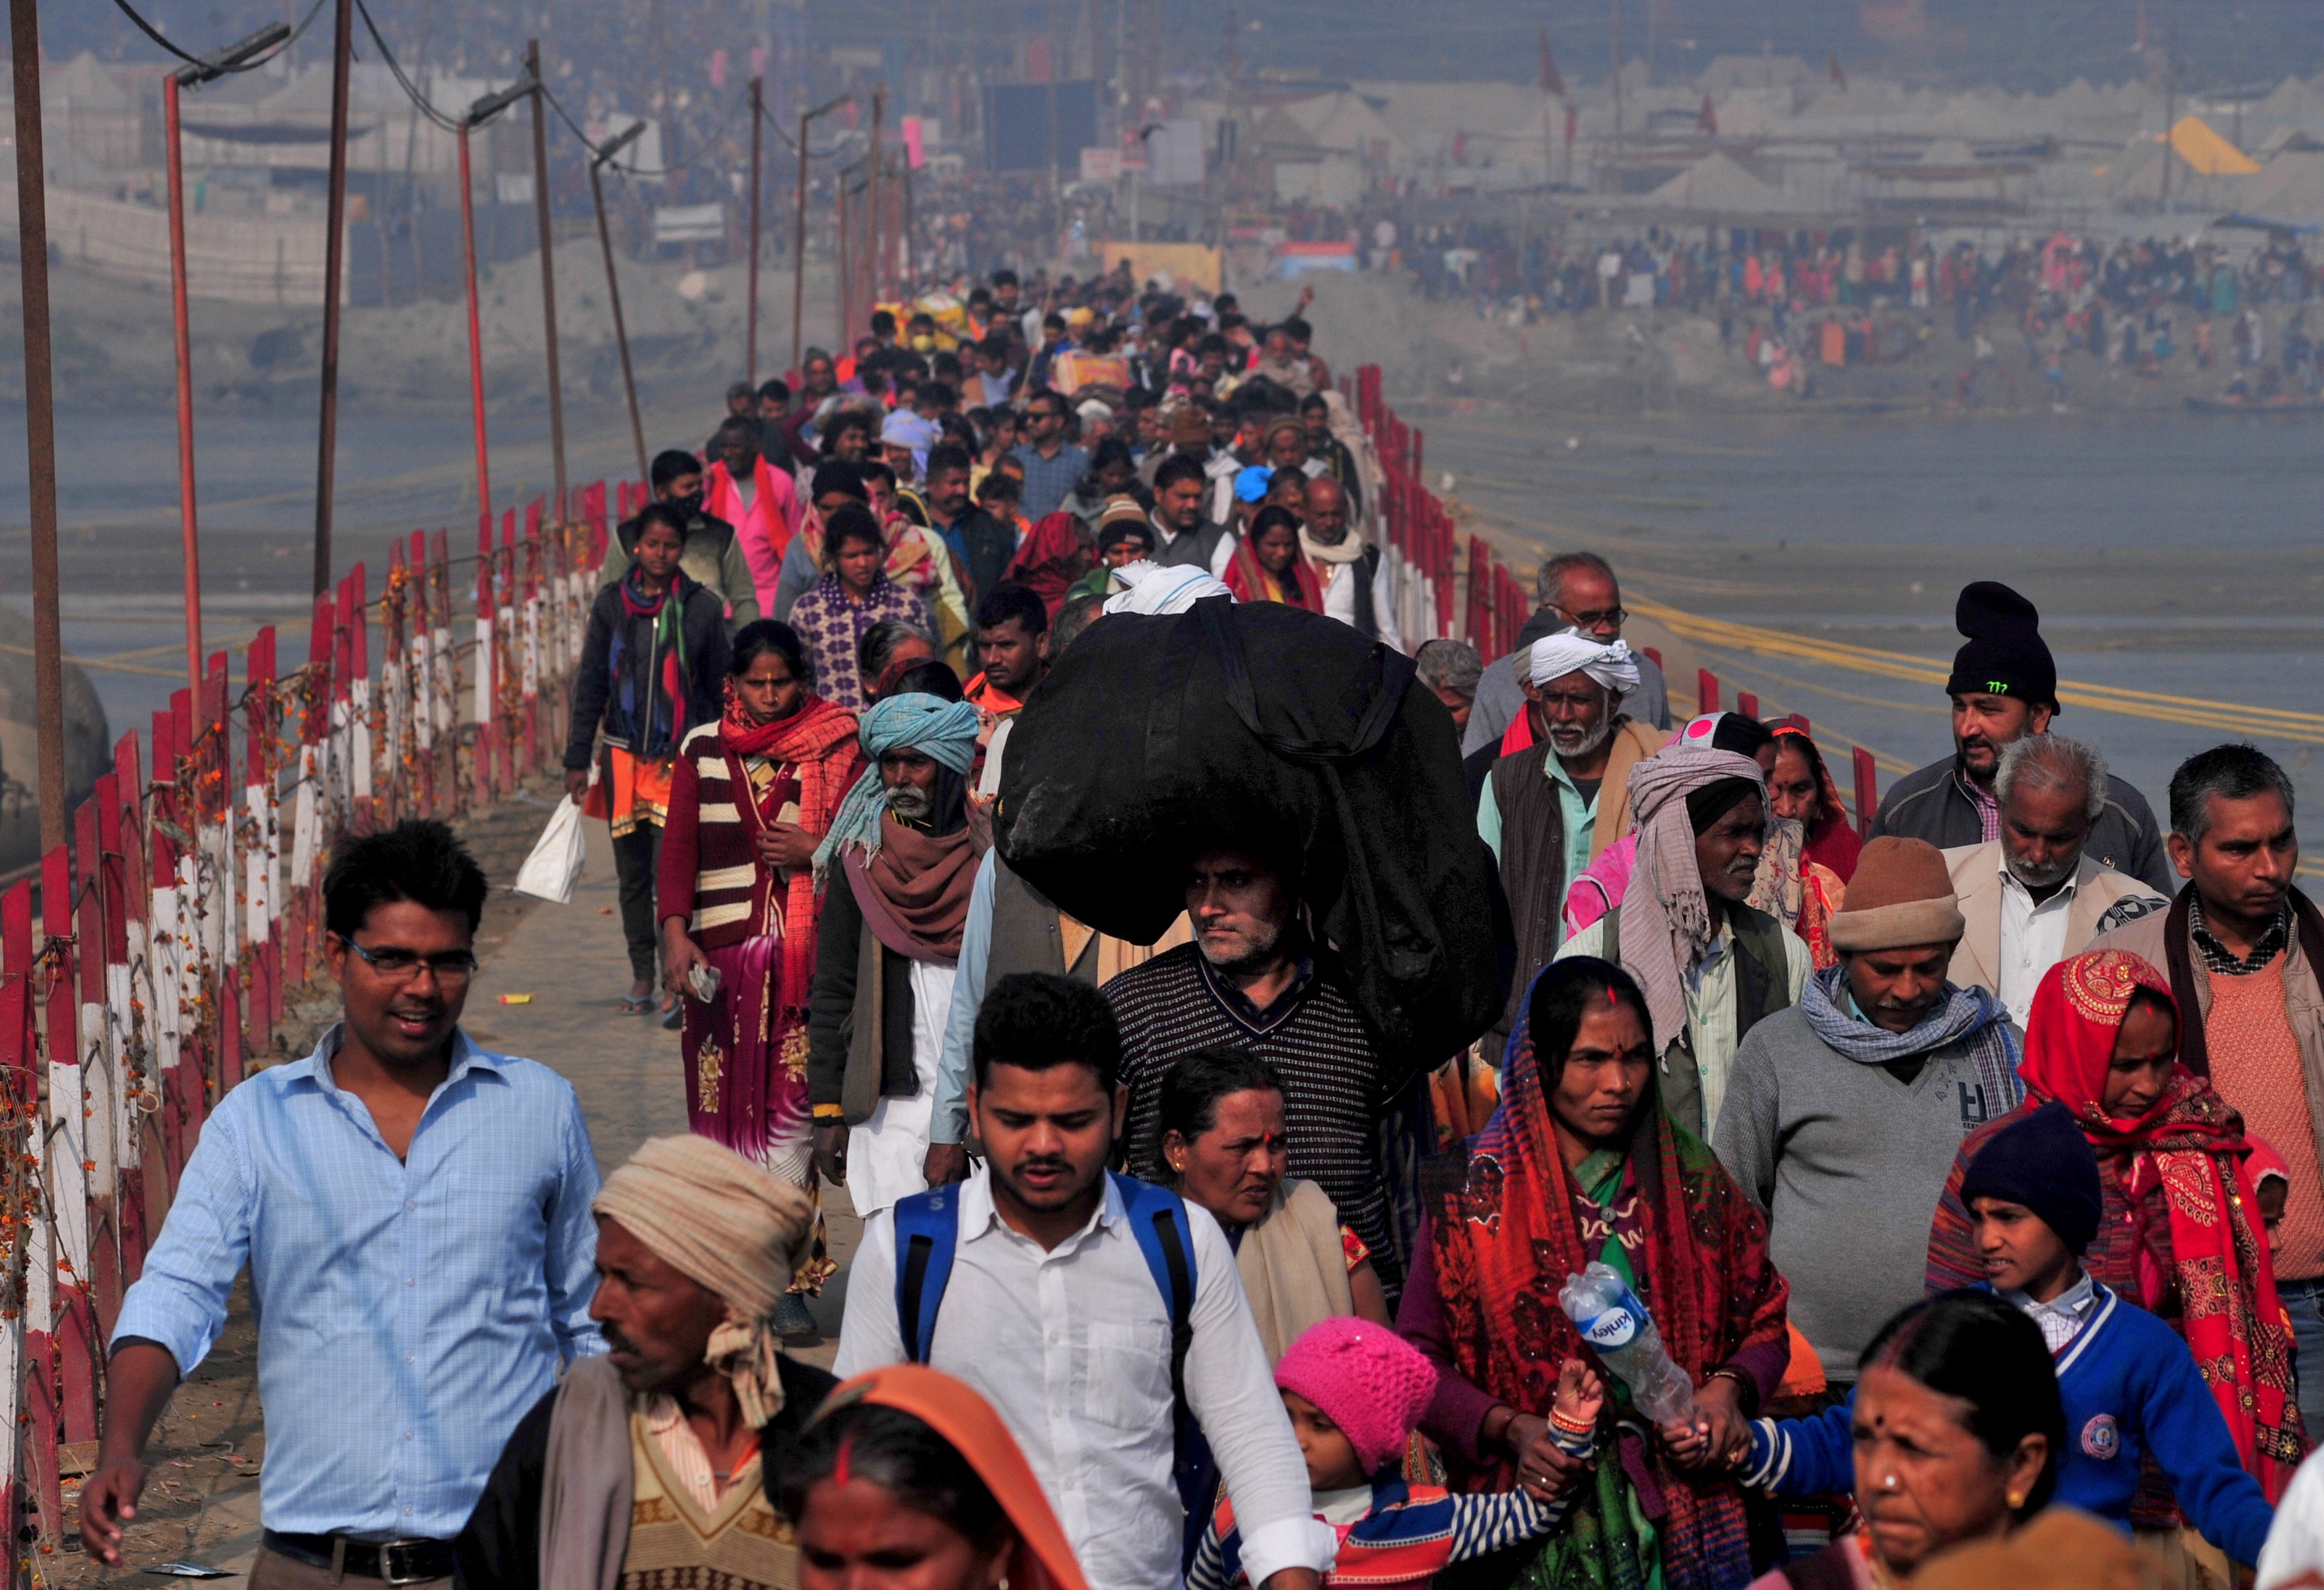 Throngs of Hindu devotees arrive to take a holy dip at Sangam in Prayagraj, India on 11 February